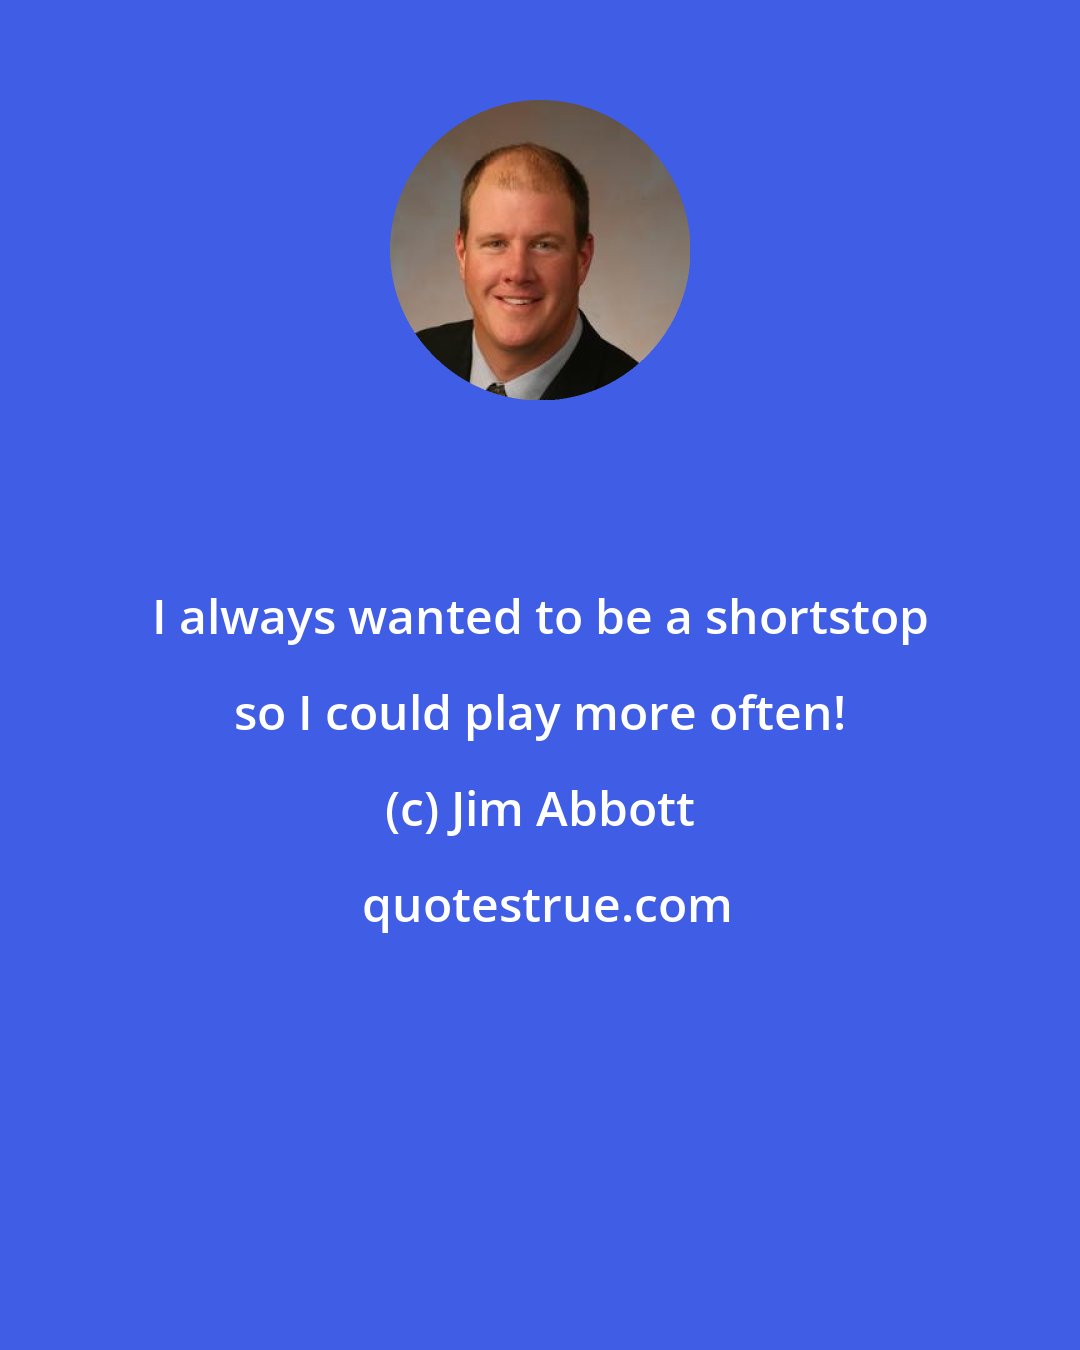 Jim Abbott: I always wanted to be a shortstop so I could play more often!